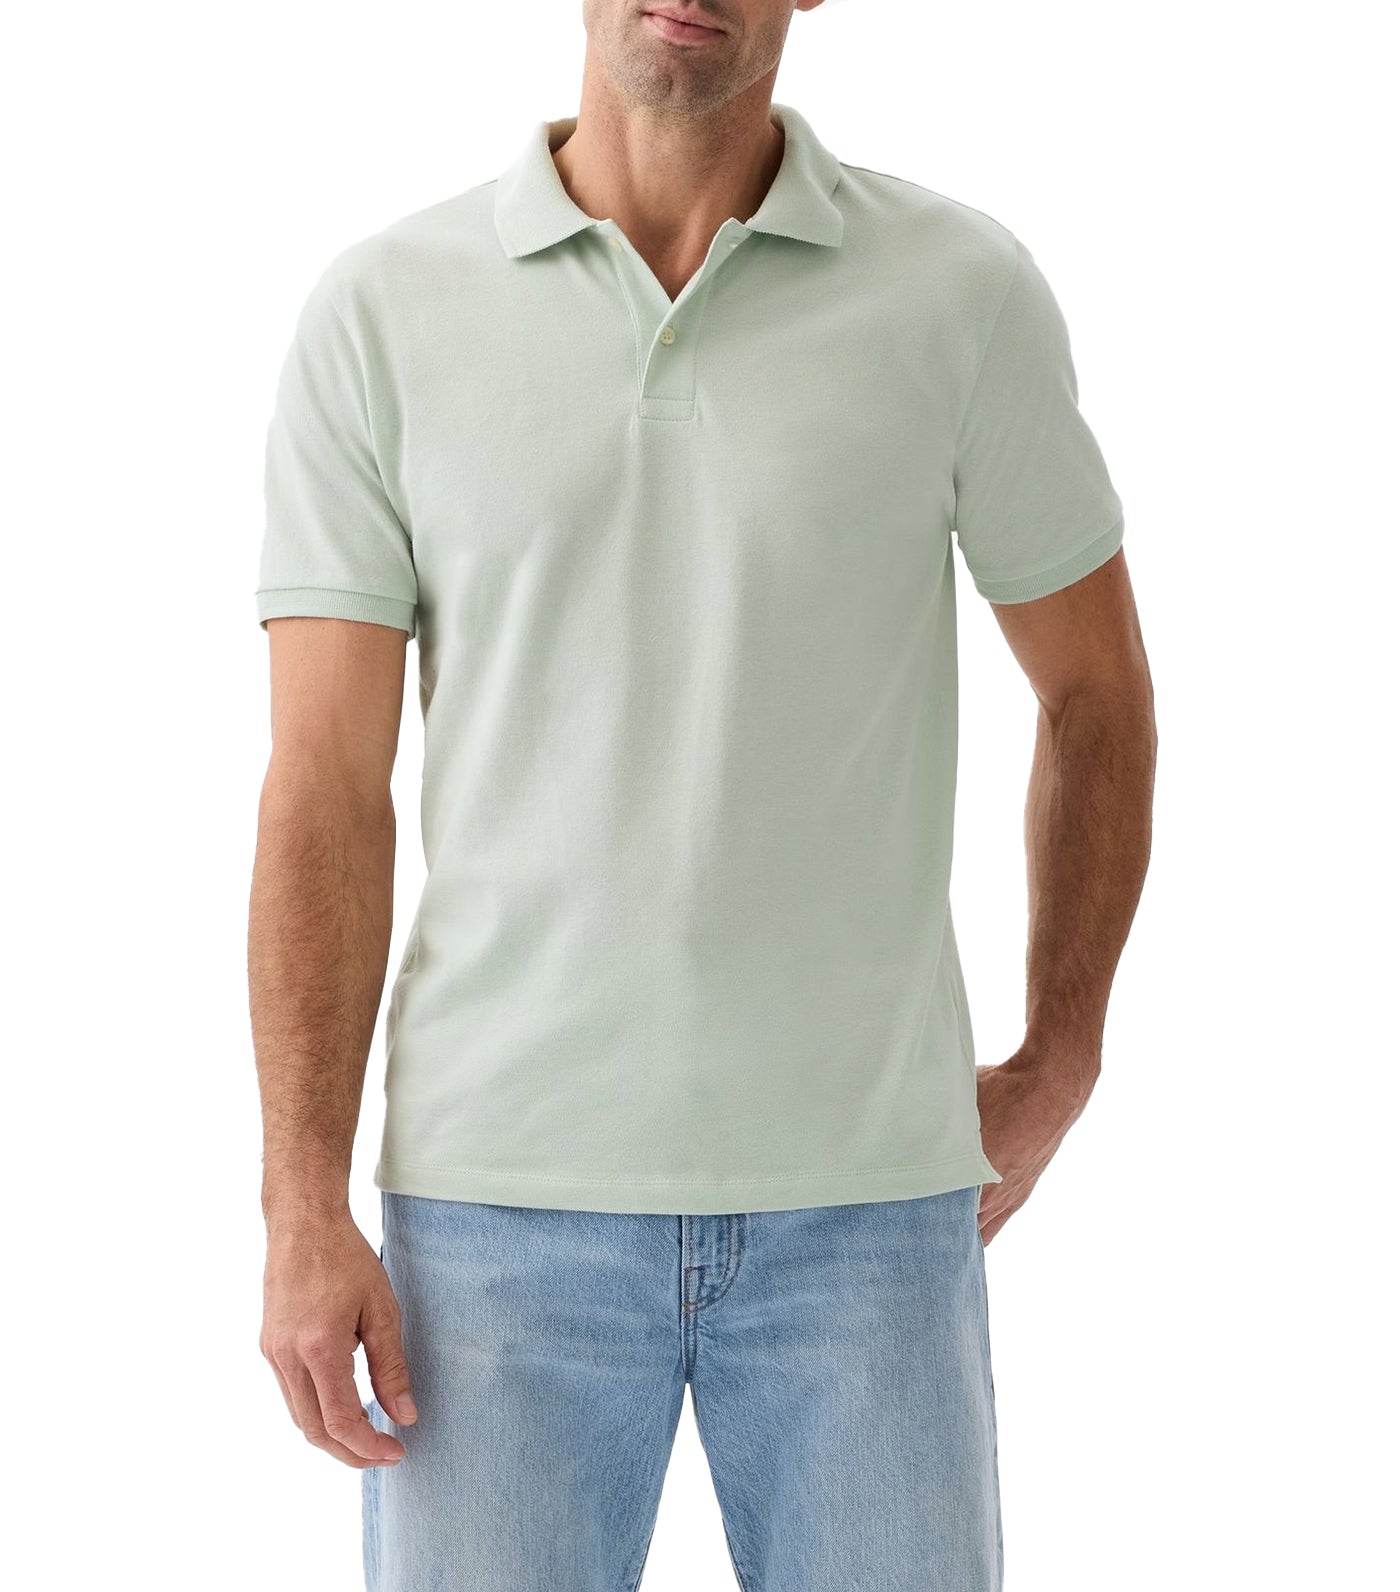 All Day Pique Polo Shirt Mint Green 074-80